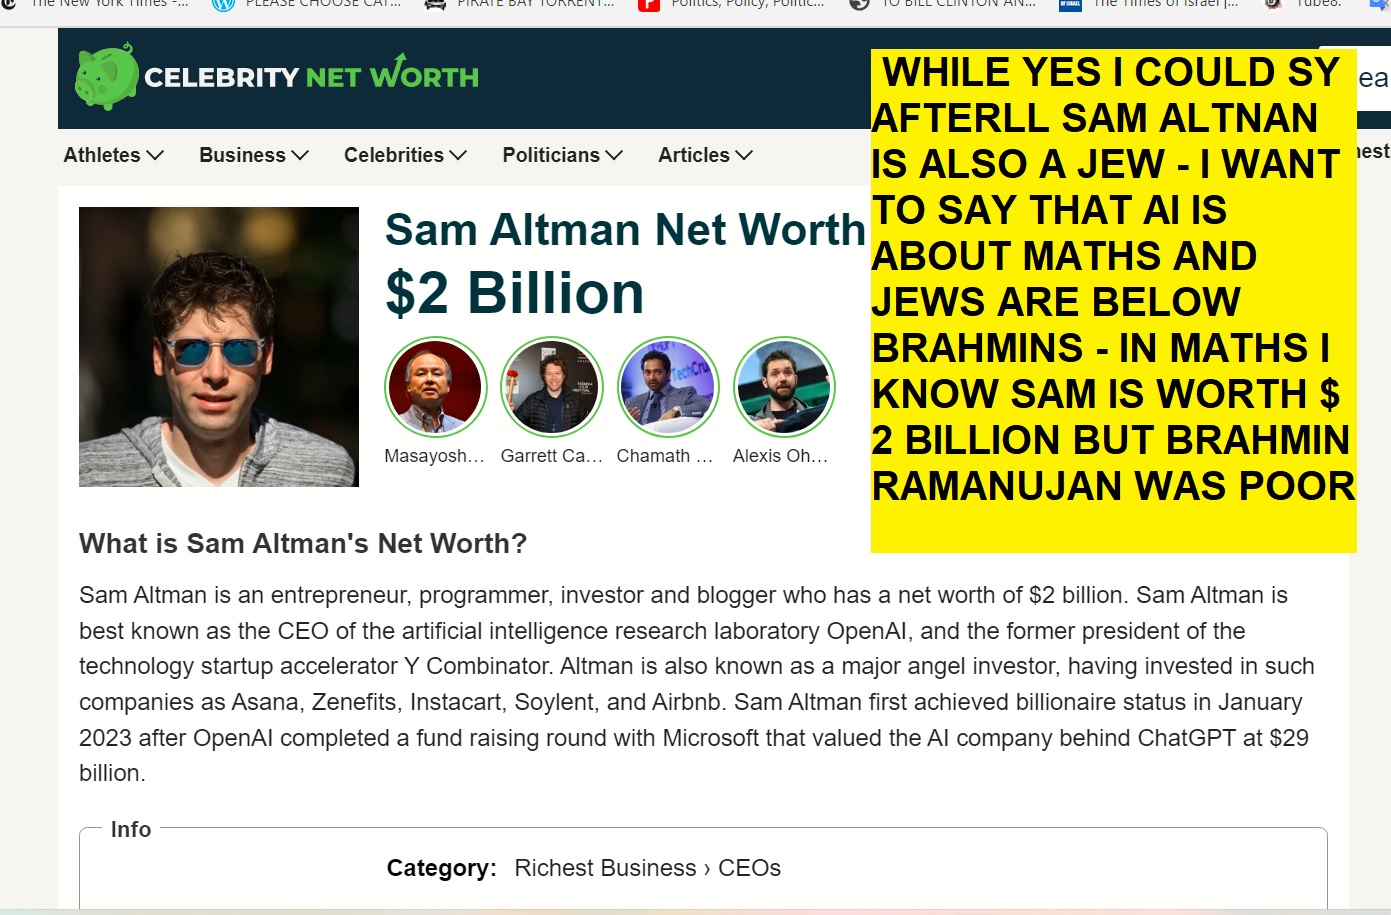 MISSION VISION STORY AND COMNICATION WHILE YES I COULD SY AFTERLL SAM ALTNAN IS ALSO A JEW - I WANT TO SAY THAT AI IS ABOUT MATHS AND JEWS ARE BELOW BRAHMINS - IN MATHS I KNOW SAM IS WORTH $ 2 BILLION BUT BRAHMIN RAMANUJAN WAS POOR